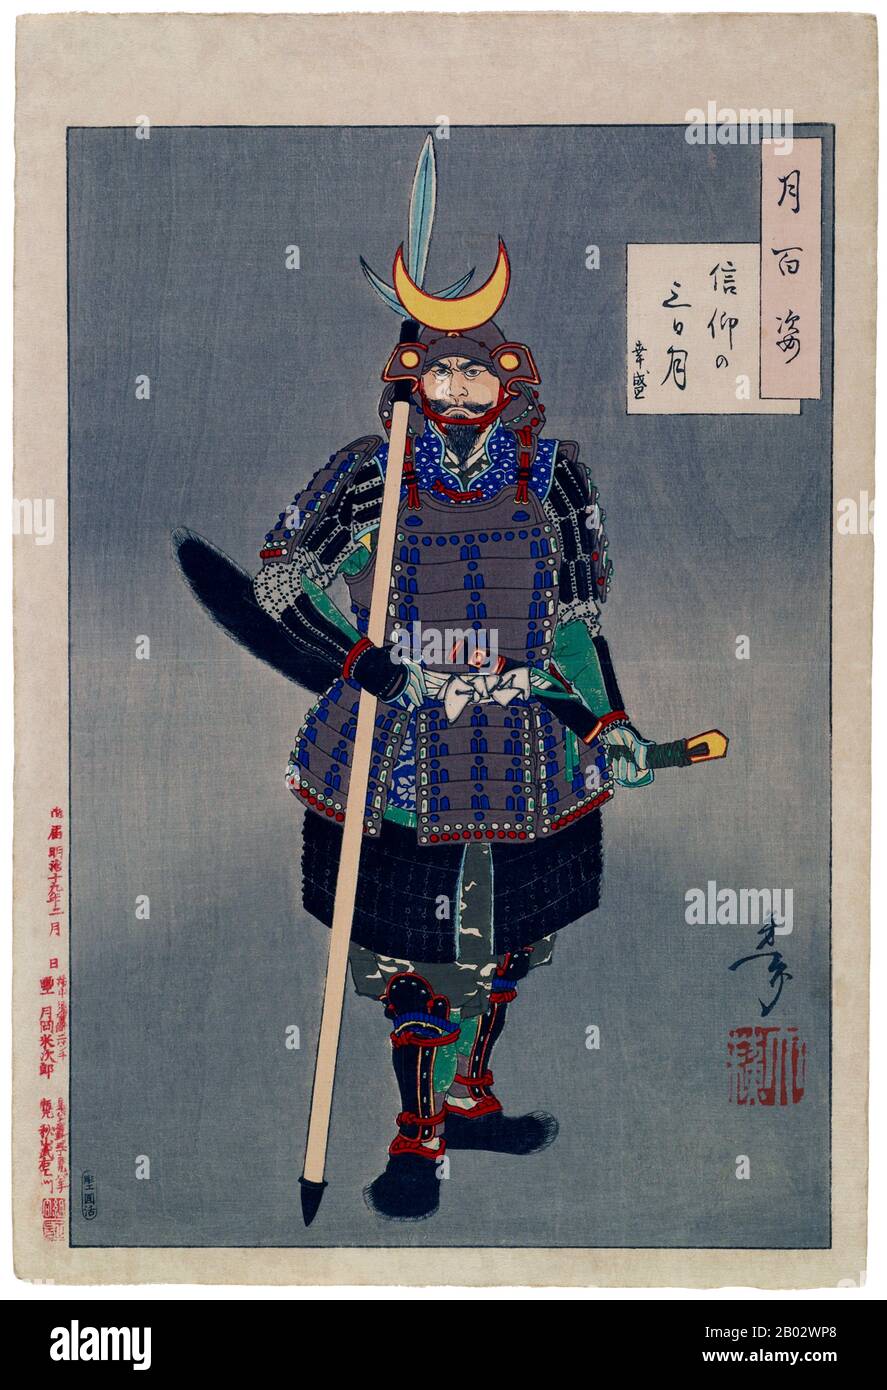 Tsukioka Yoshitoshi (30 April 1839 – 9 June 1892) was a Japanese artist and Ukiyo-e woodblock print master.  Yukimori (1543-76), a samurai known for his great strength and loyalty, served the Amako warlord during a time in Japanese history referred to as 'Sengoku', or 'the country at war'. He wears a suit of armor called 'tosei gusoku' ('modern equipment') that was designed in the 16th century to be worn by a foot soldier. Stock Photo